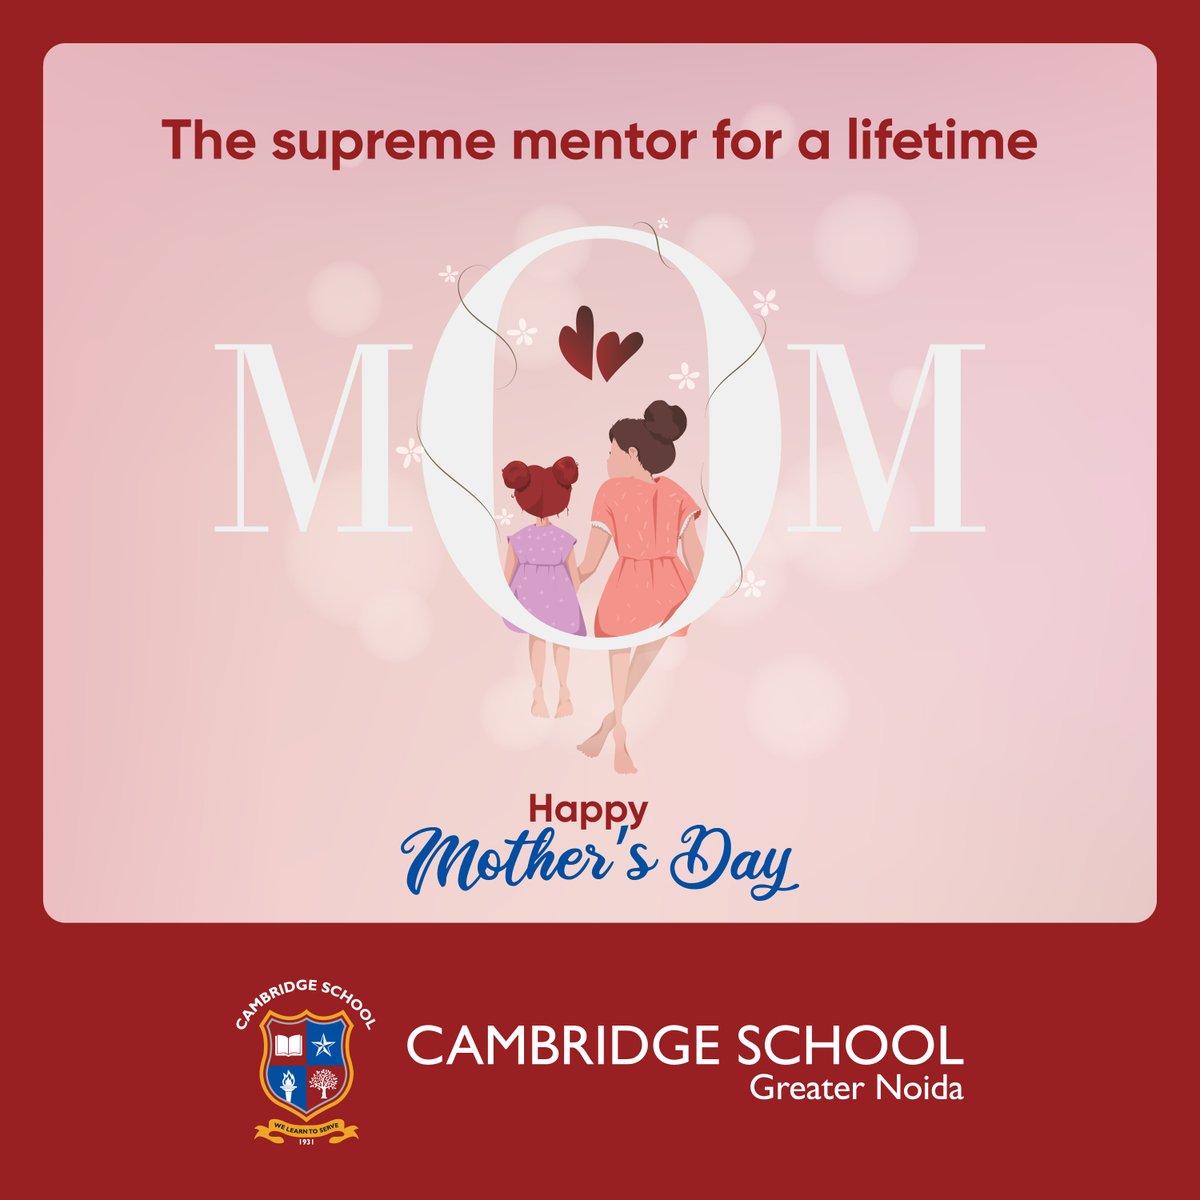 Life is a lesson and she is the greatest teacher. Cambridge School wishes you a very happy Mother’s Day.
.
.
.
#CambridgeSchoolGreaterNoida #CambridgeSchool #CSGN #WeLearnToServe #CBSESchool #Education #Knowledge #Leadership #HappyMothersDay2023 #SupremeMentor #LifetimeMentor